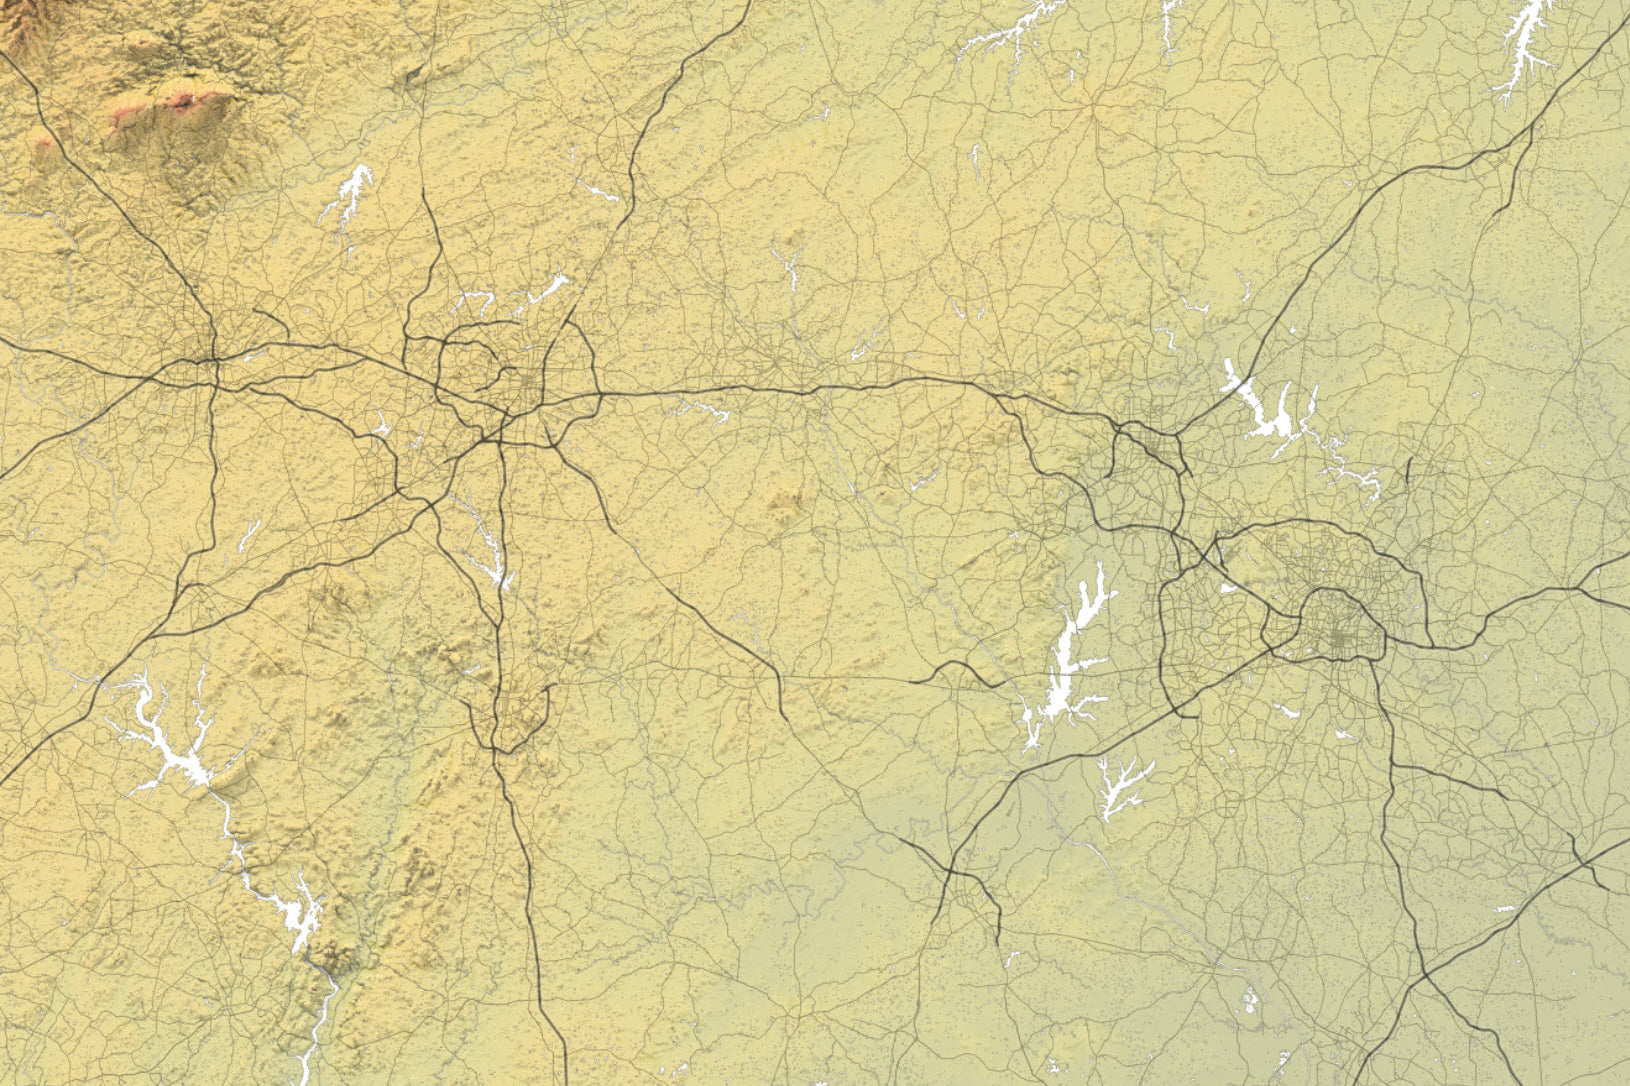 Detail of north carolina topography with roads